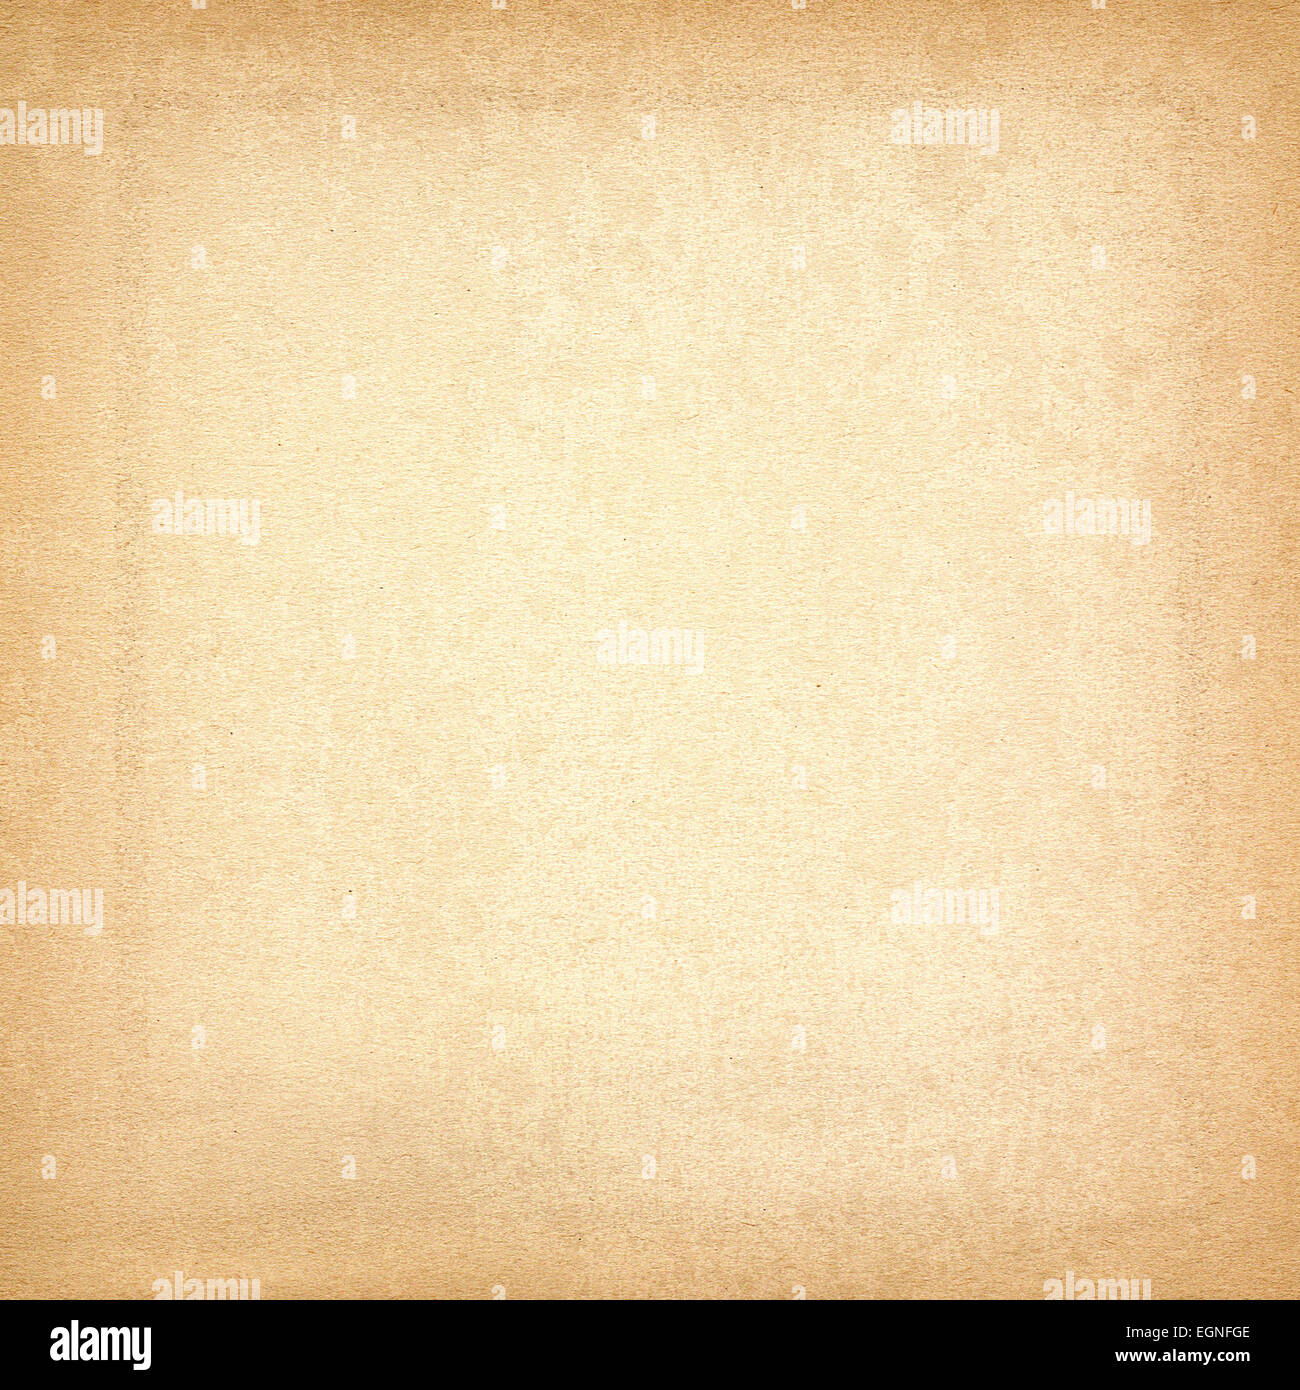 Parchment texture. Old blank sheet of paper. Grunge cardboard background Stock Photo